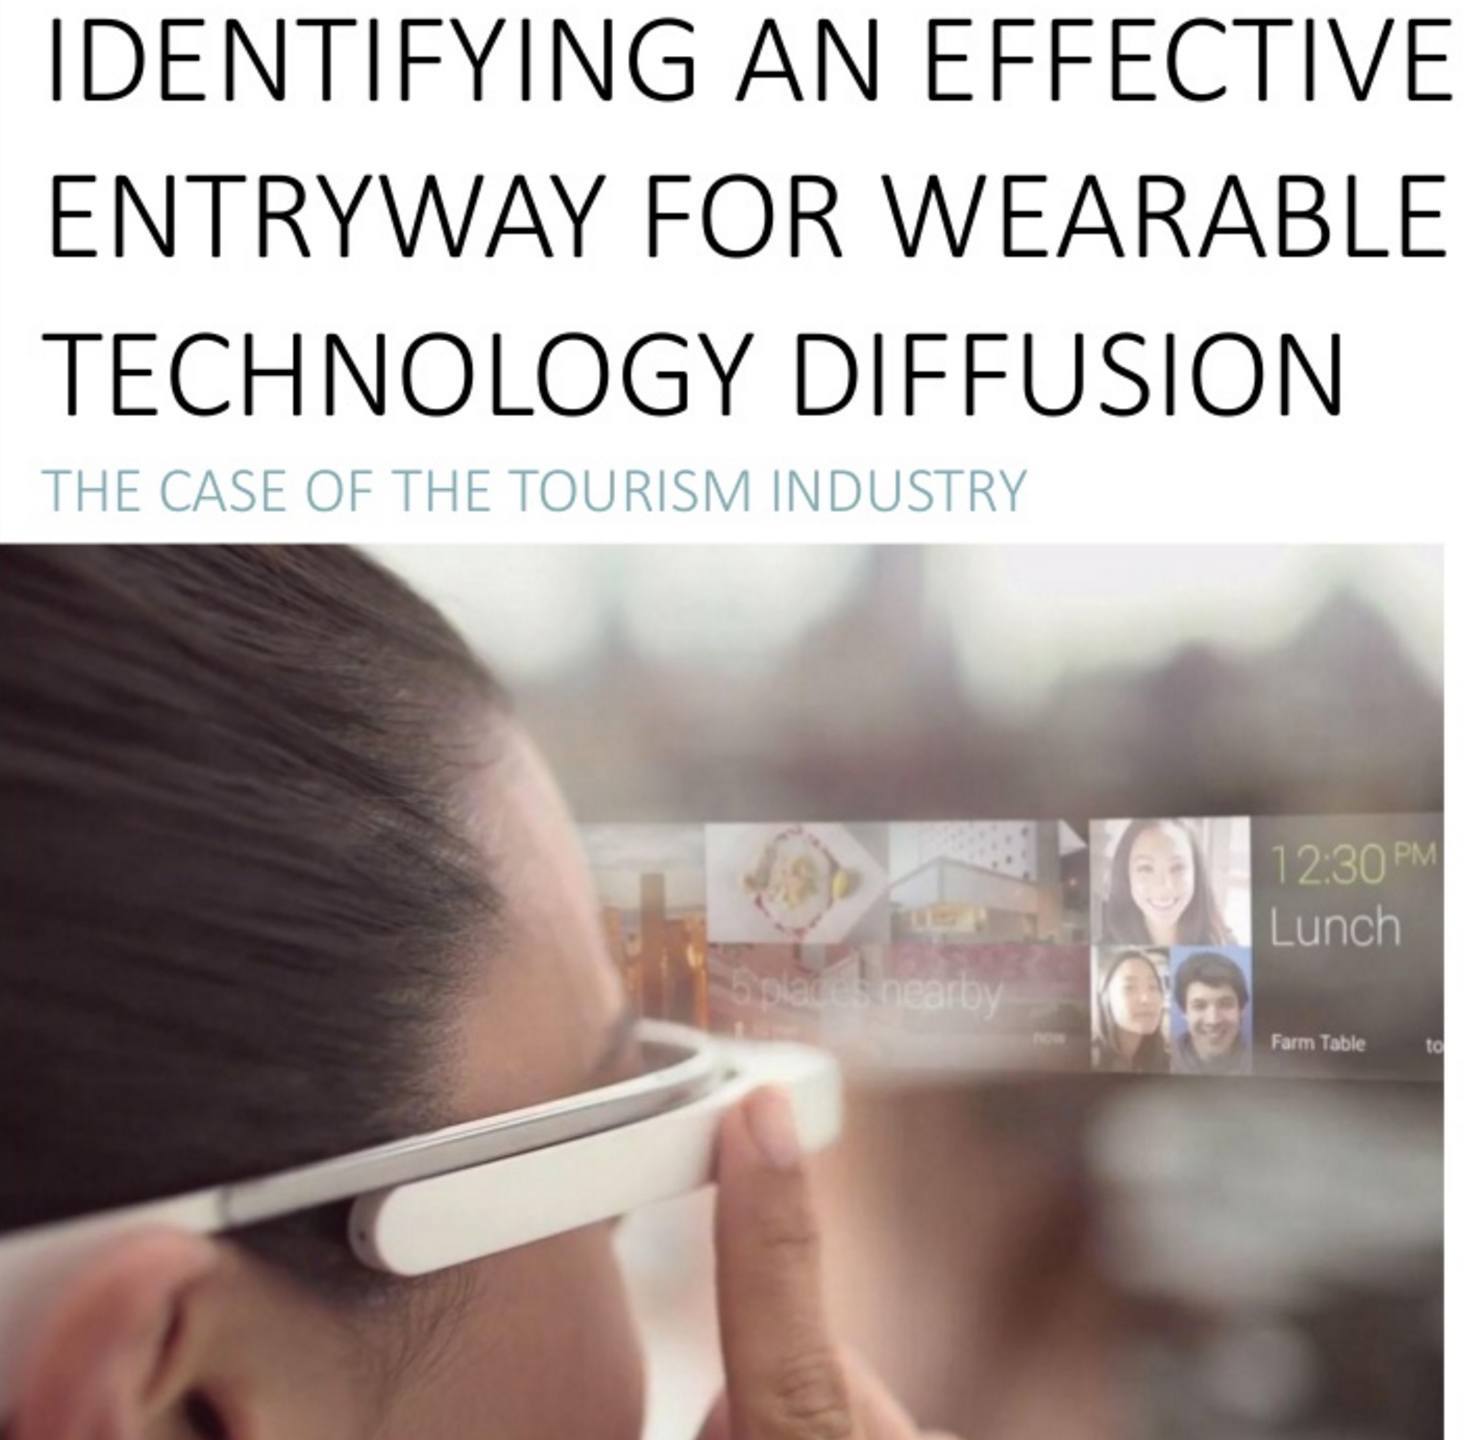 Identifying an effective entryway for wearable technology diffusion